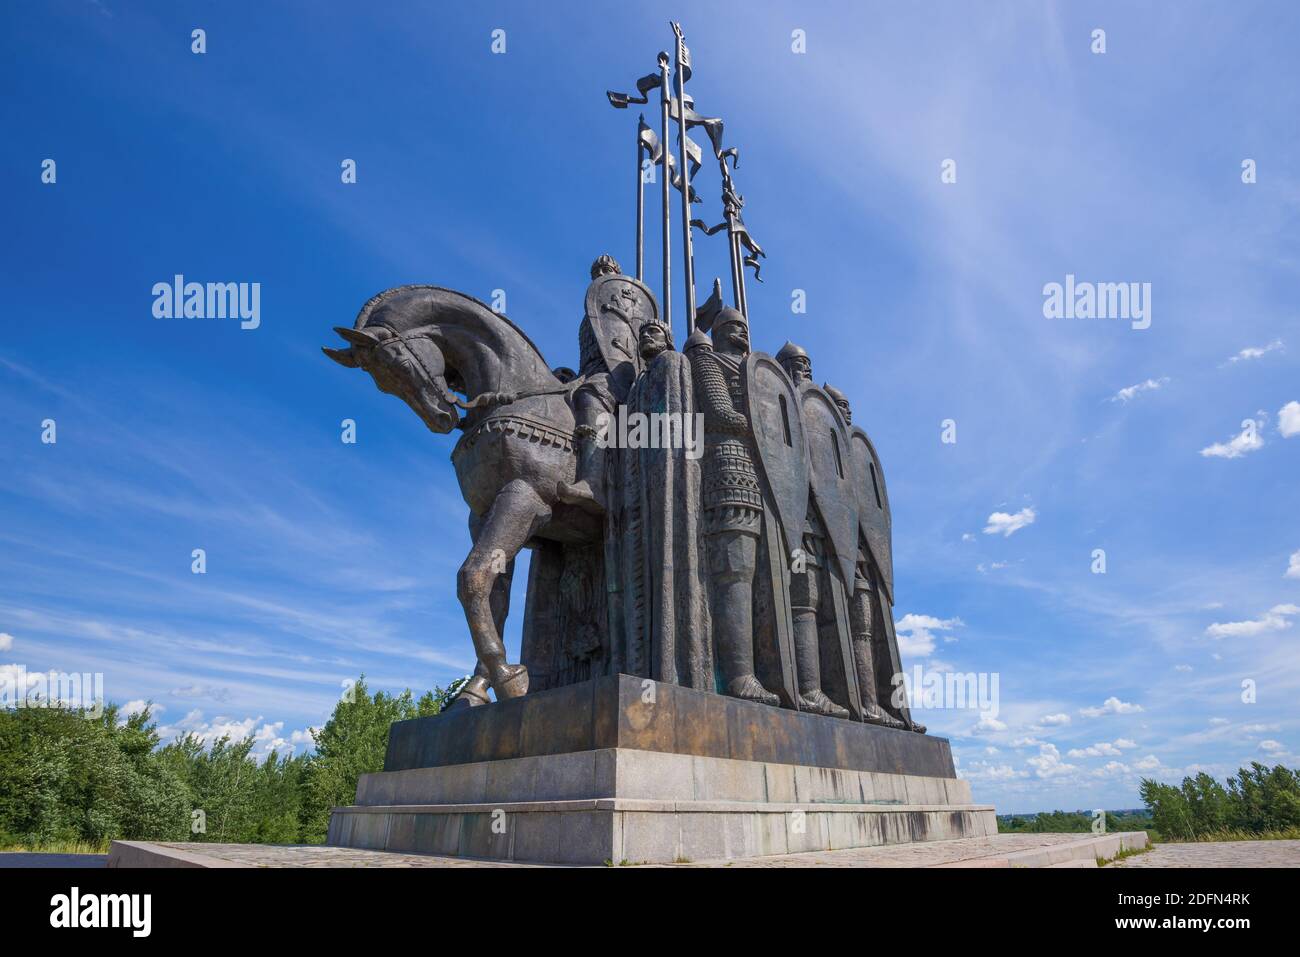 PSKOV, RUSSIA-JUNE 11, 2018: At the foot of the monument 'Battle of the Ice' on a Sunny June day Stock Photo